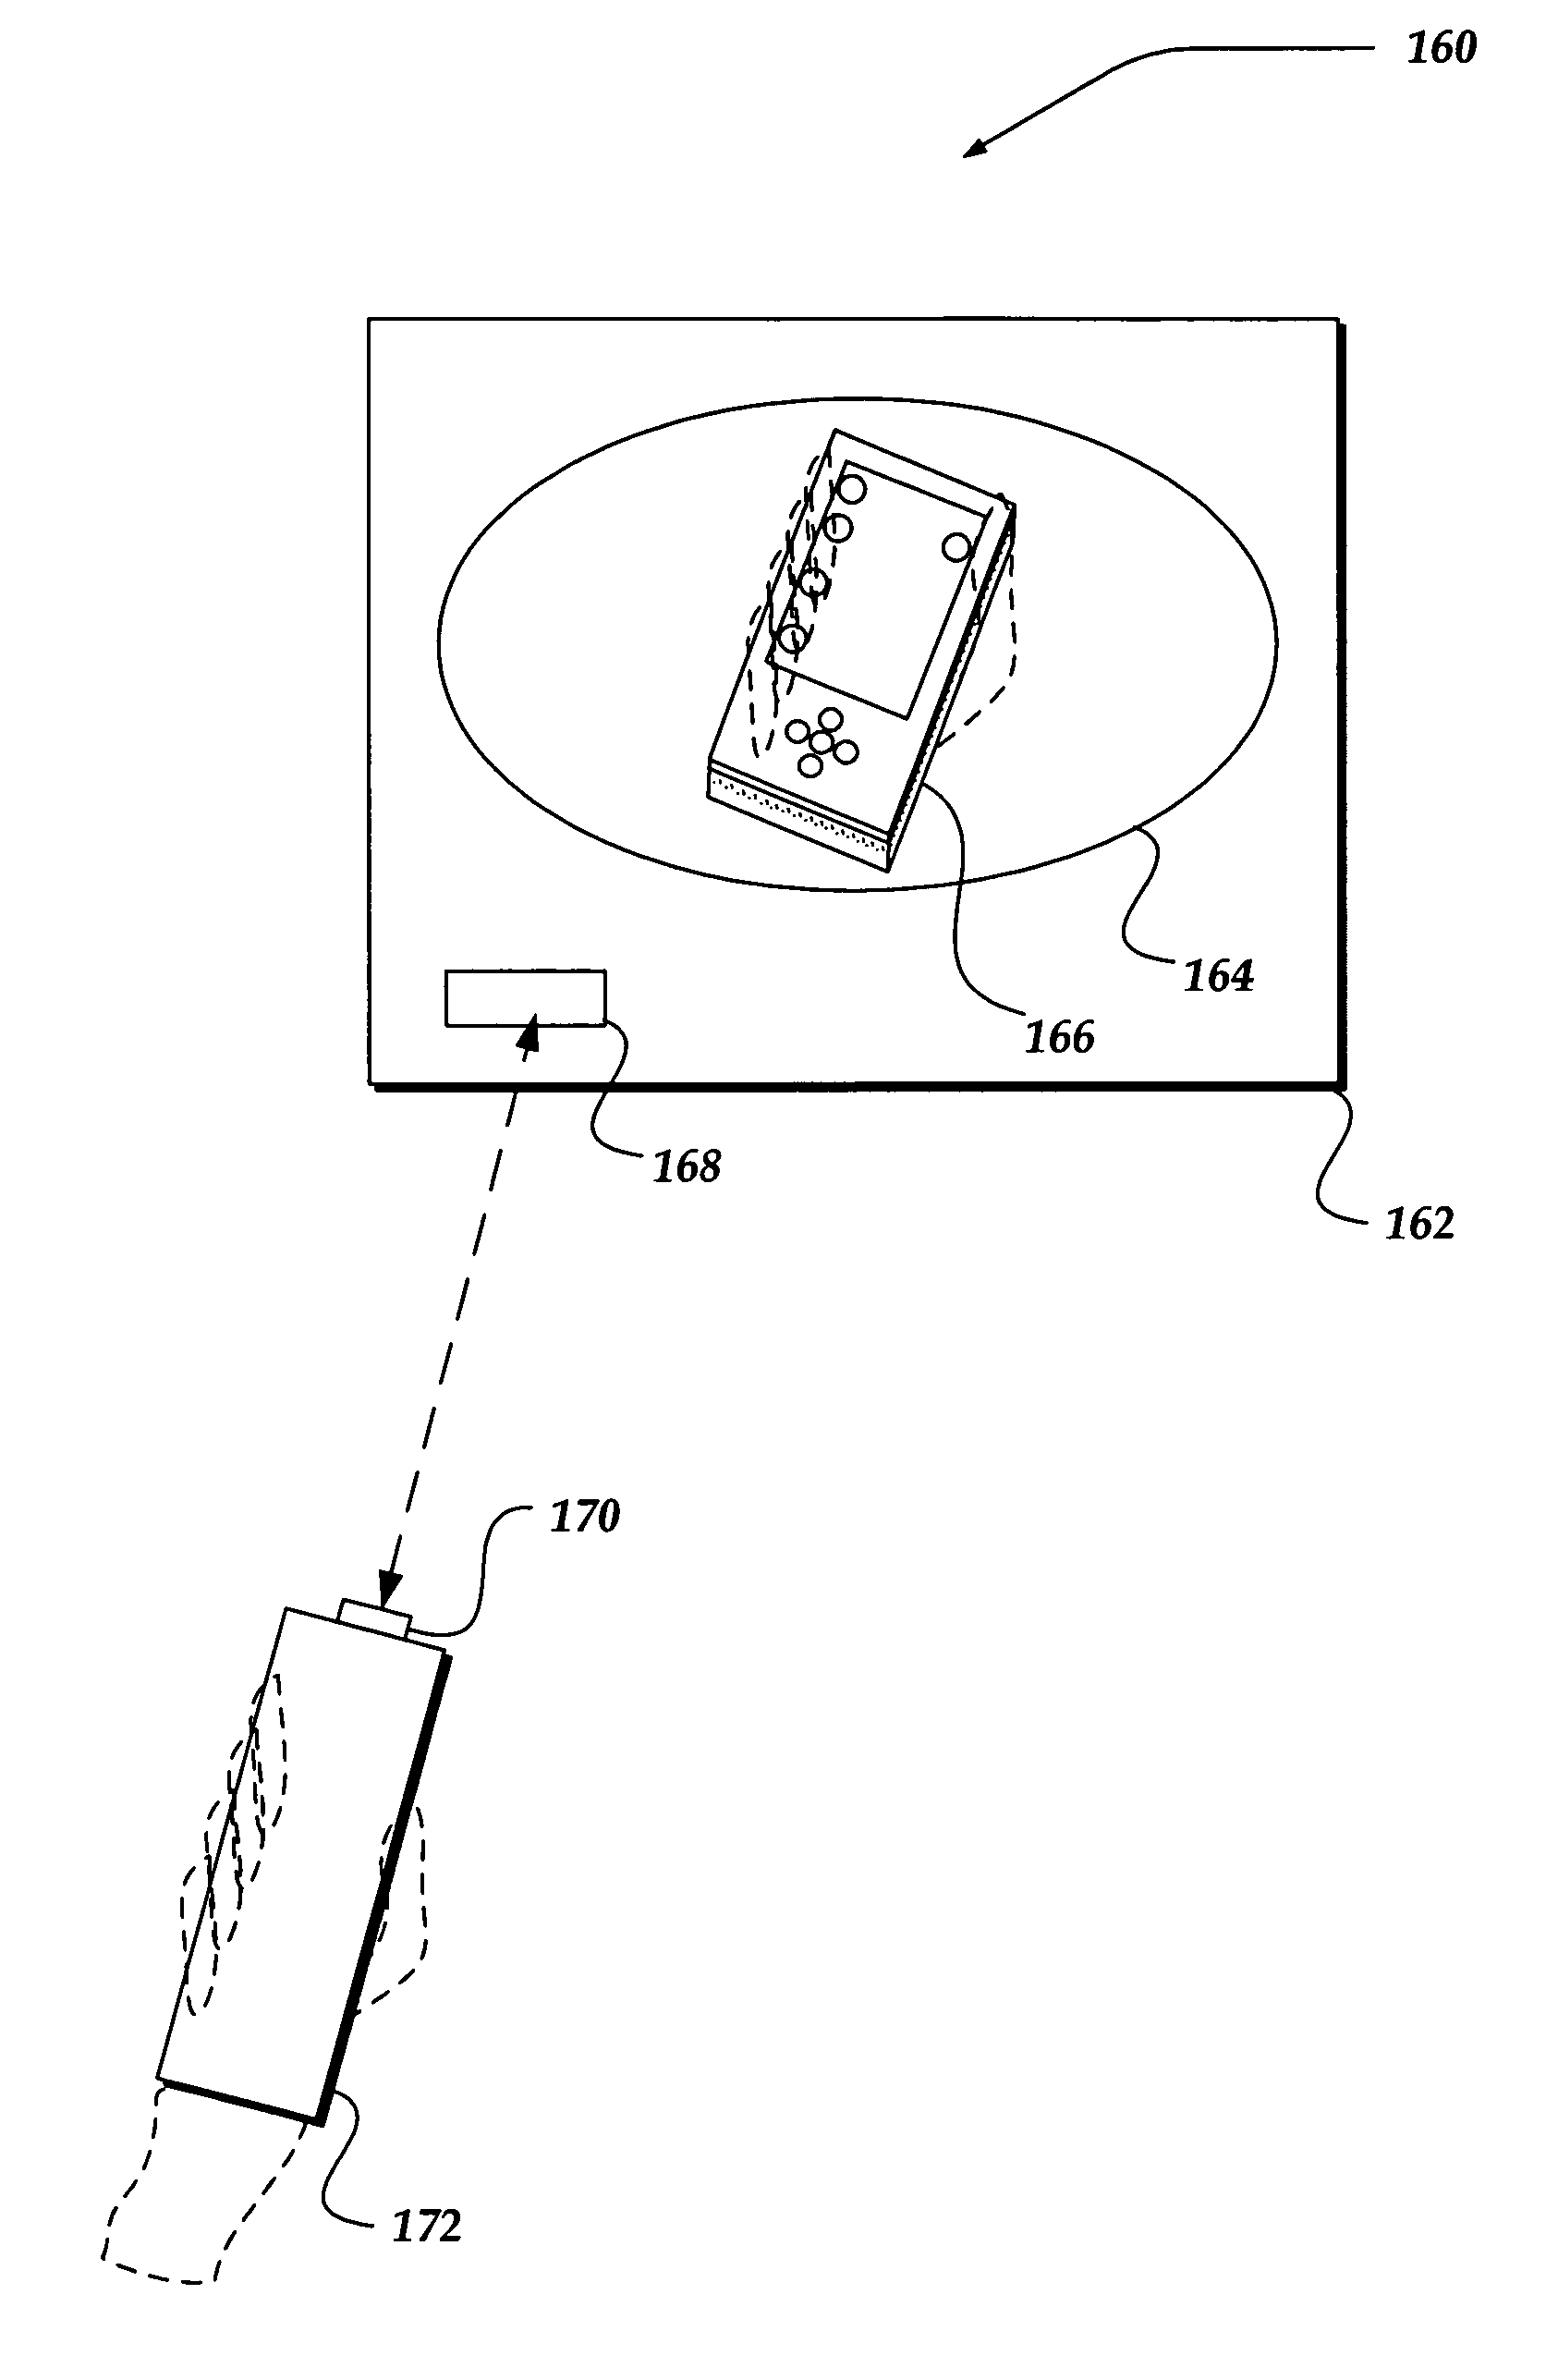 Optical detection of user interaction based on external light source